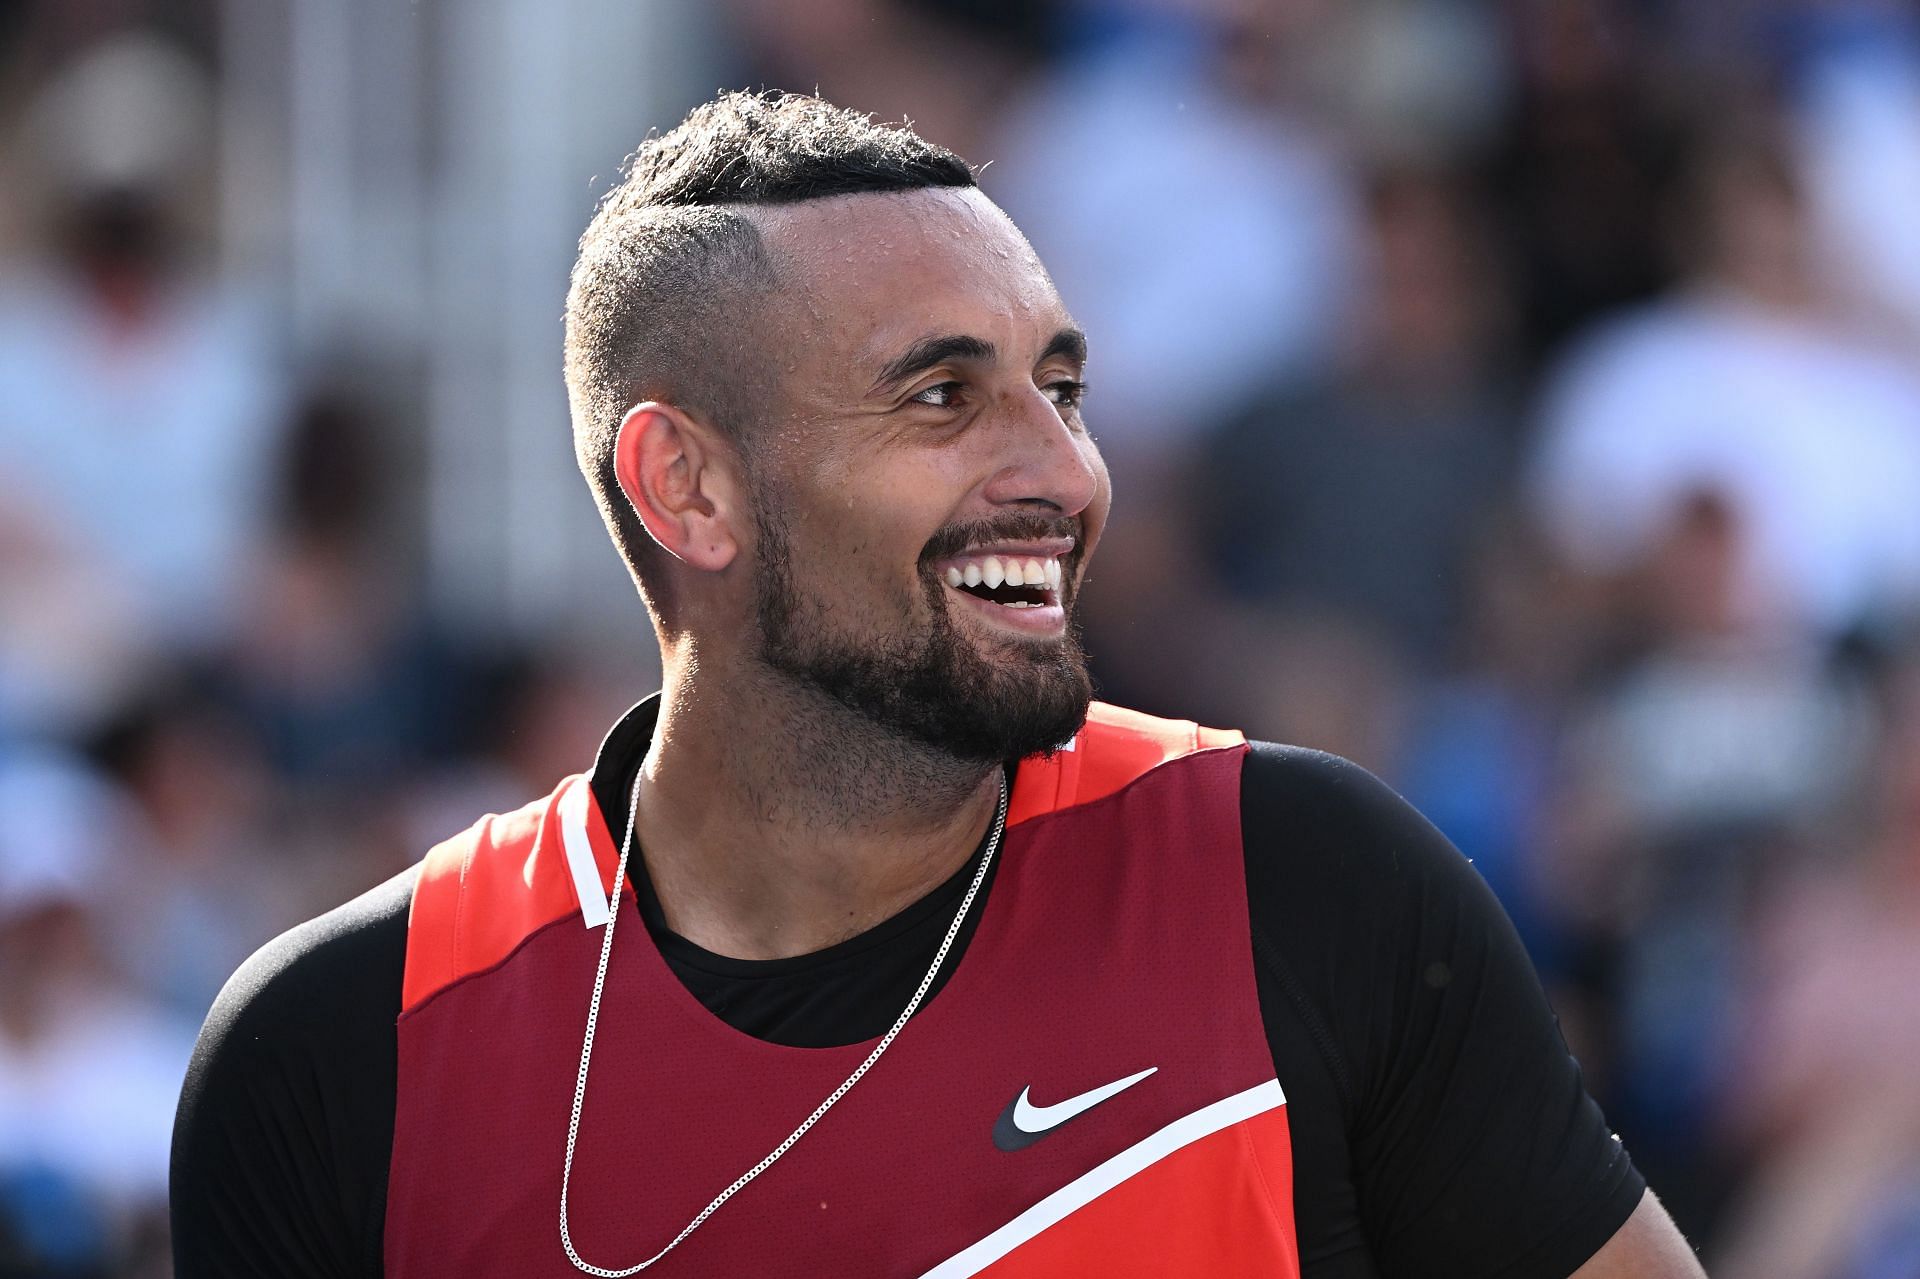 Nick Kyrgios called his current relationship with Novak Djokovic a bromance.